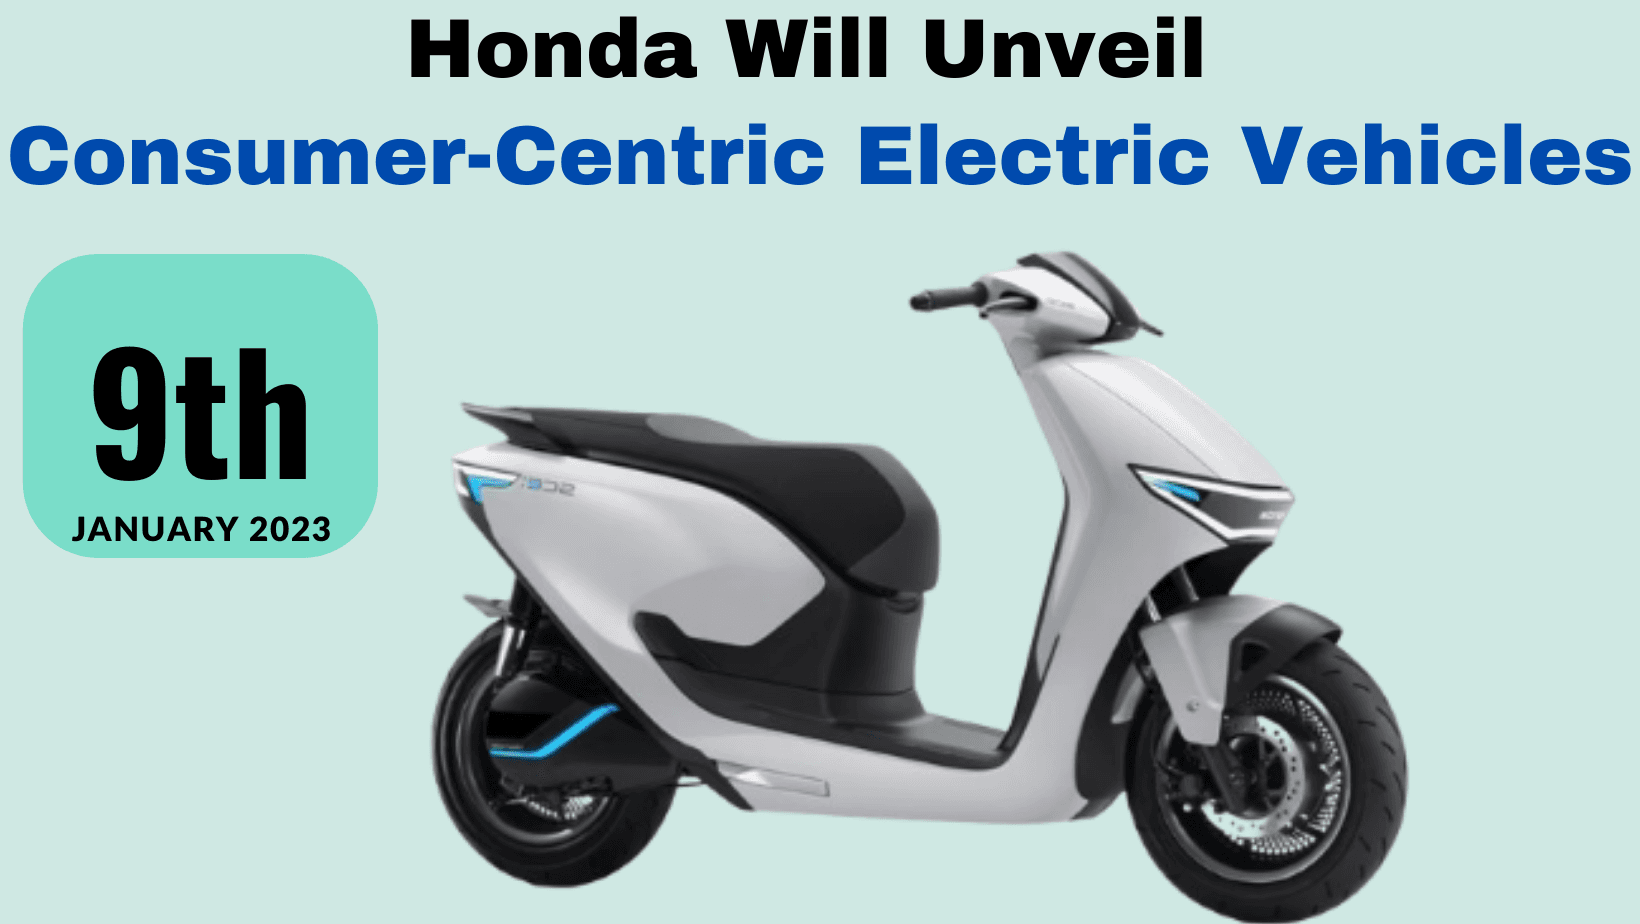 Honda Activa To Come In Electric Avatar On this Date: More EVs In-Line From Honda news